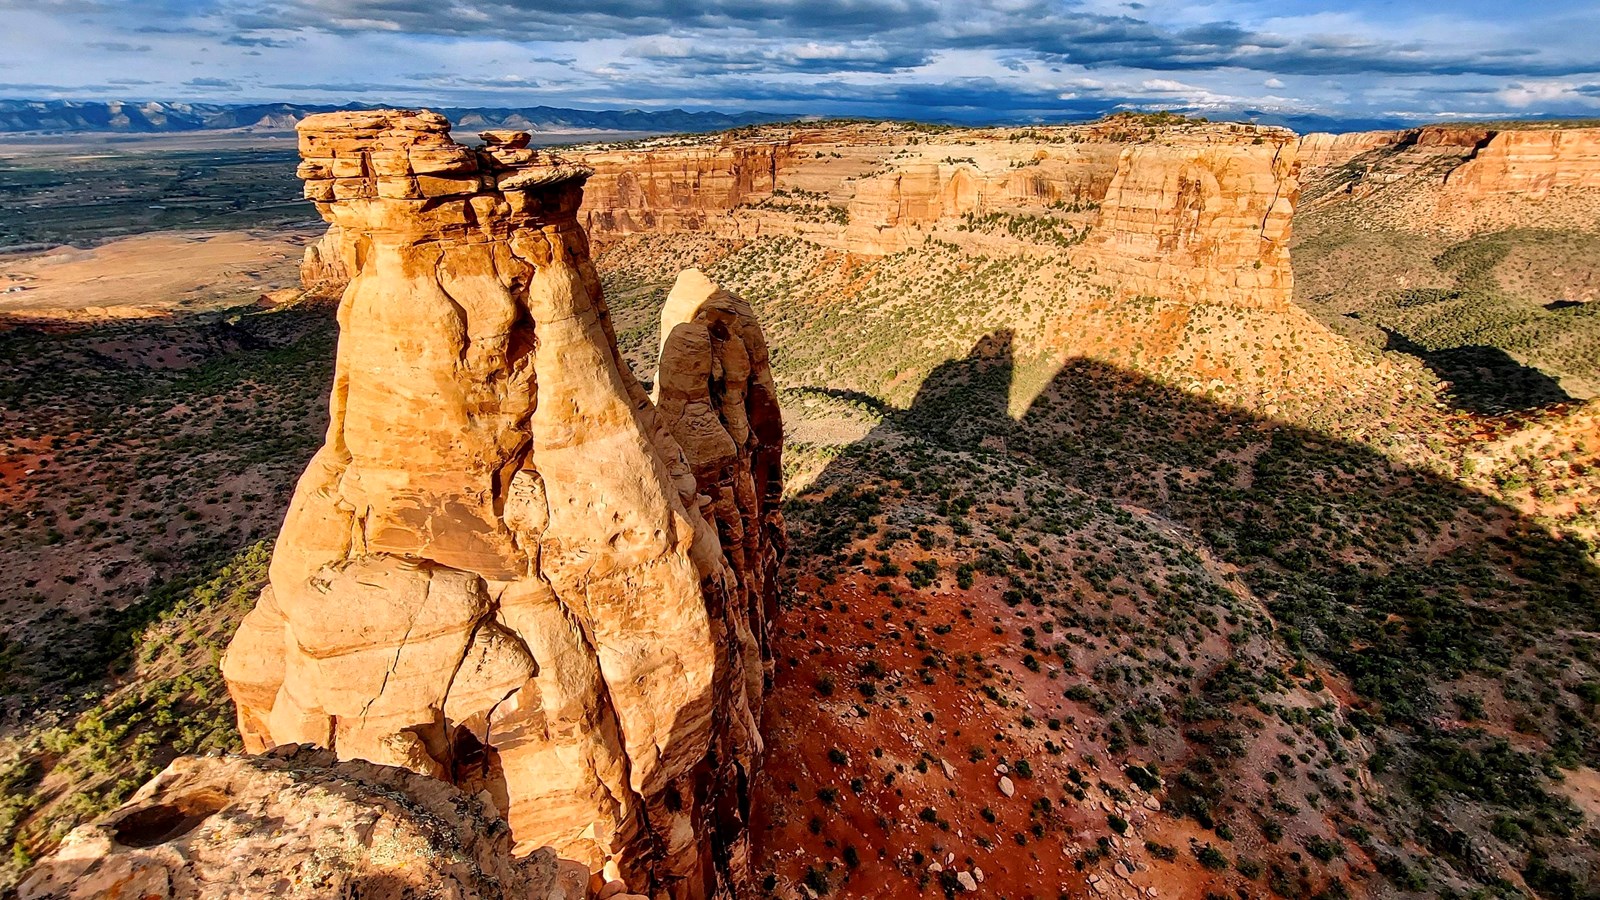 a sandstone monolith towers over forested canyons hundreds of feet below